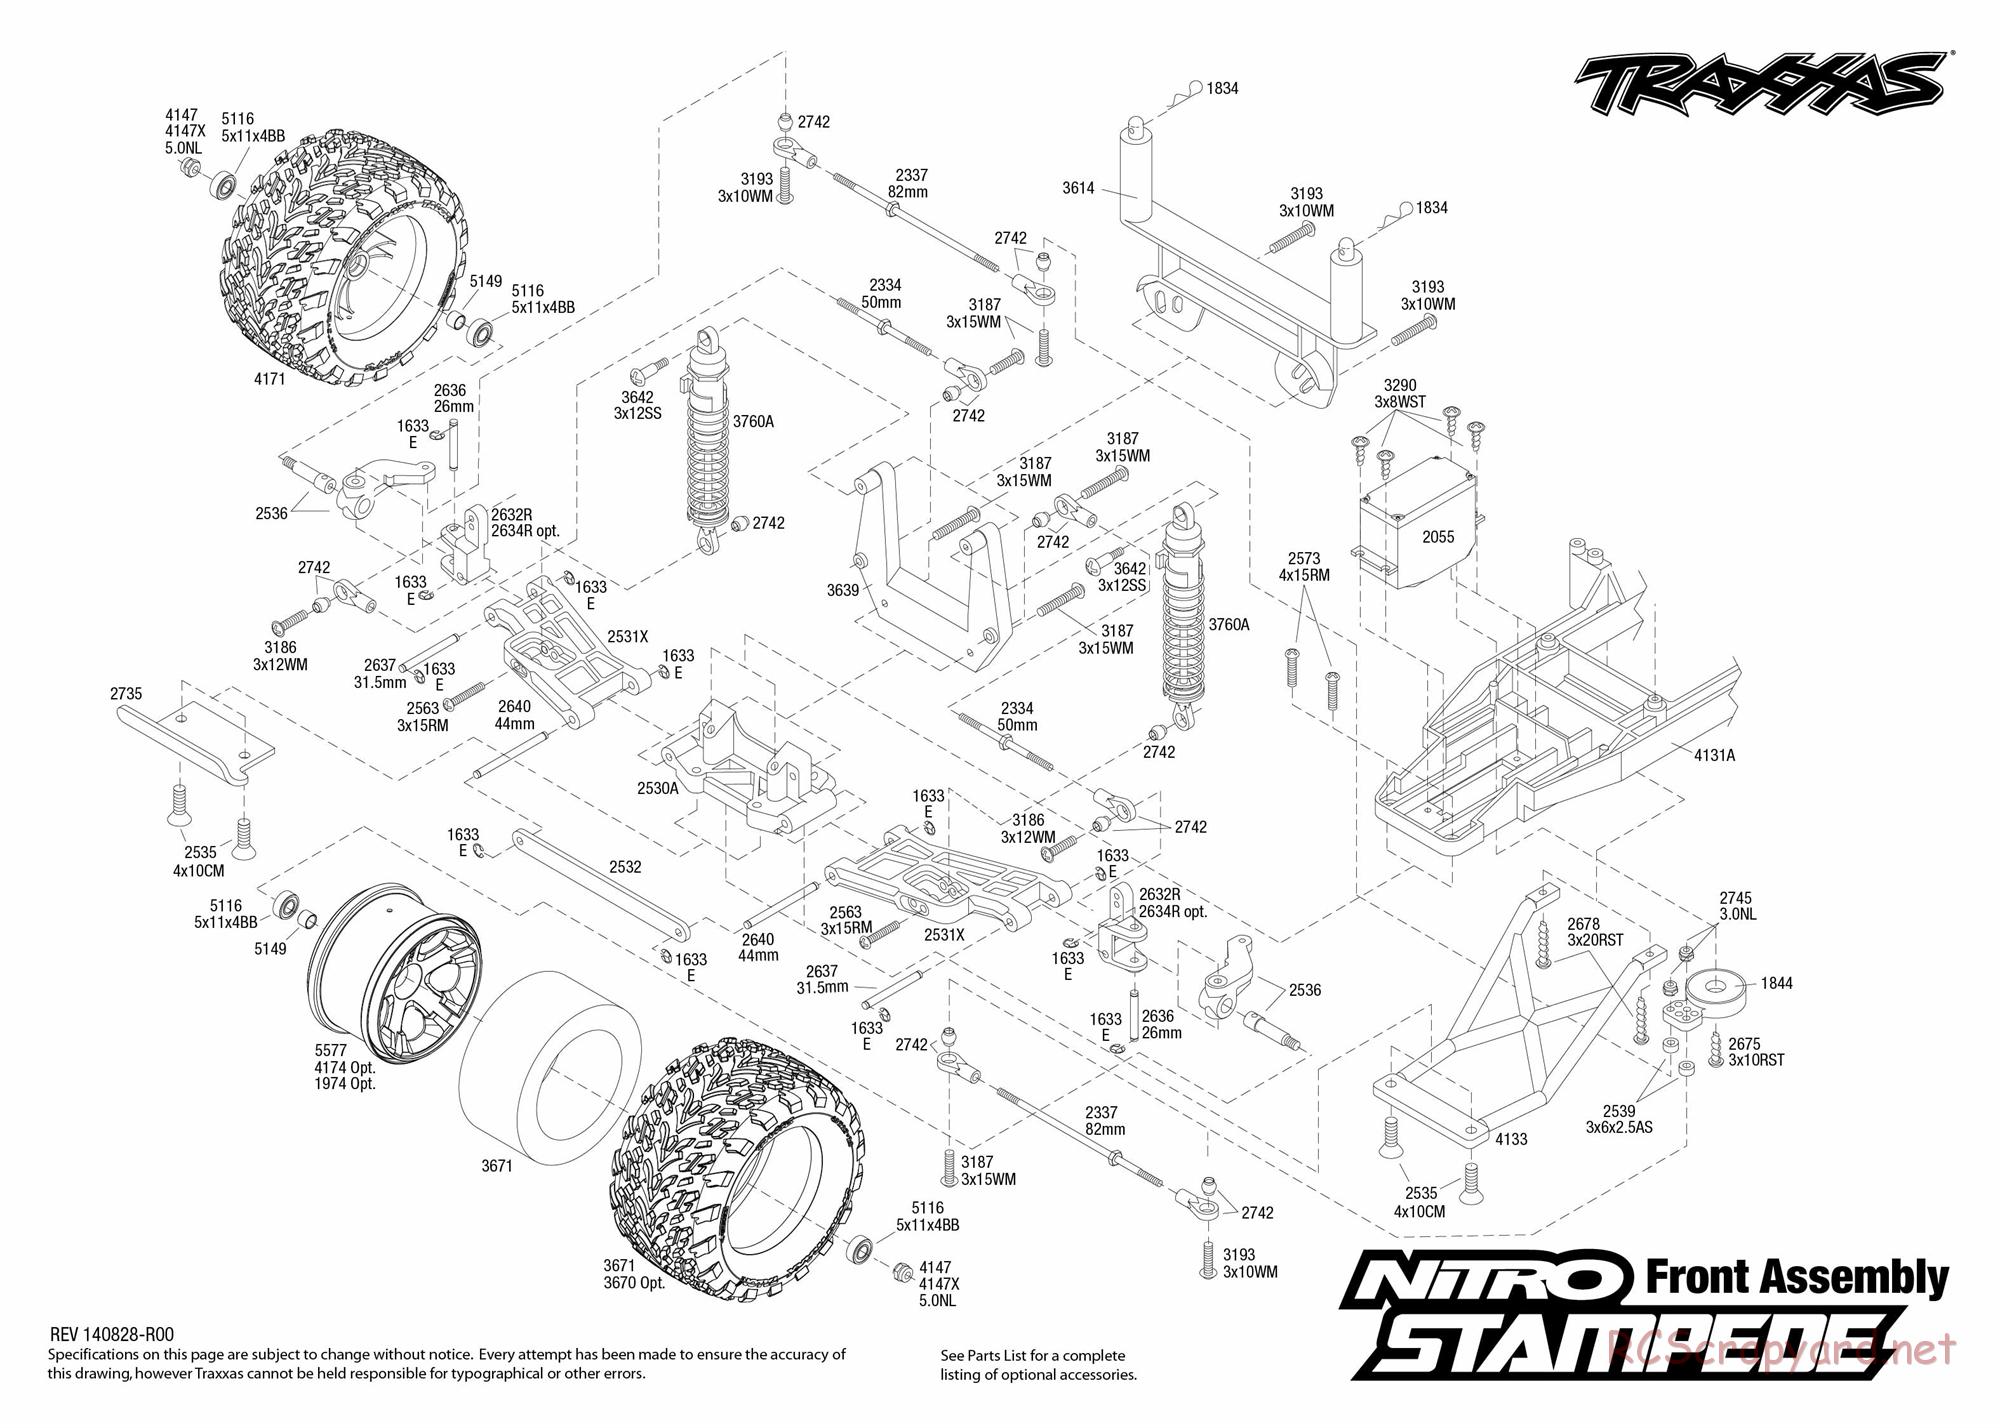 Traxxas - Nitro Stampede (2015) - Exploded Views - Page 2